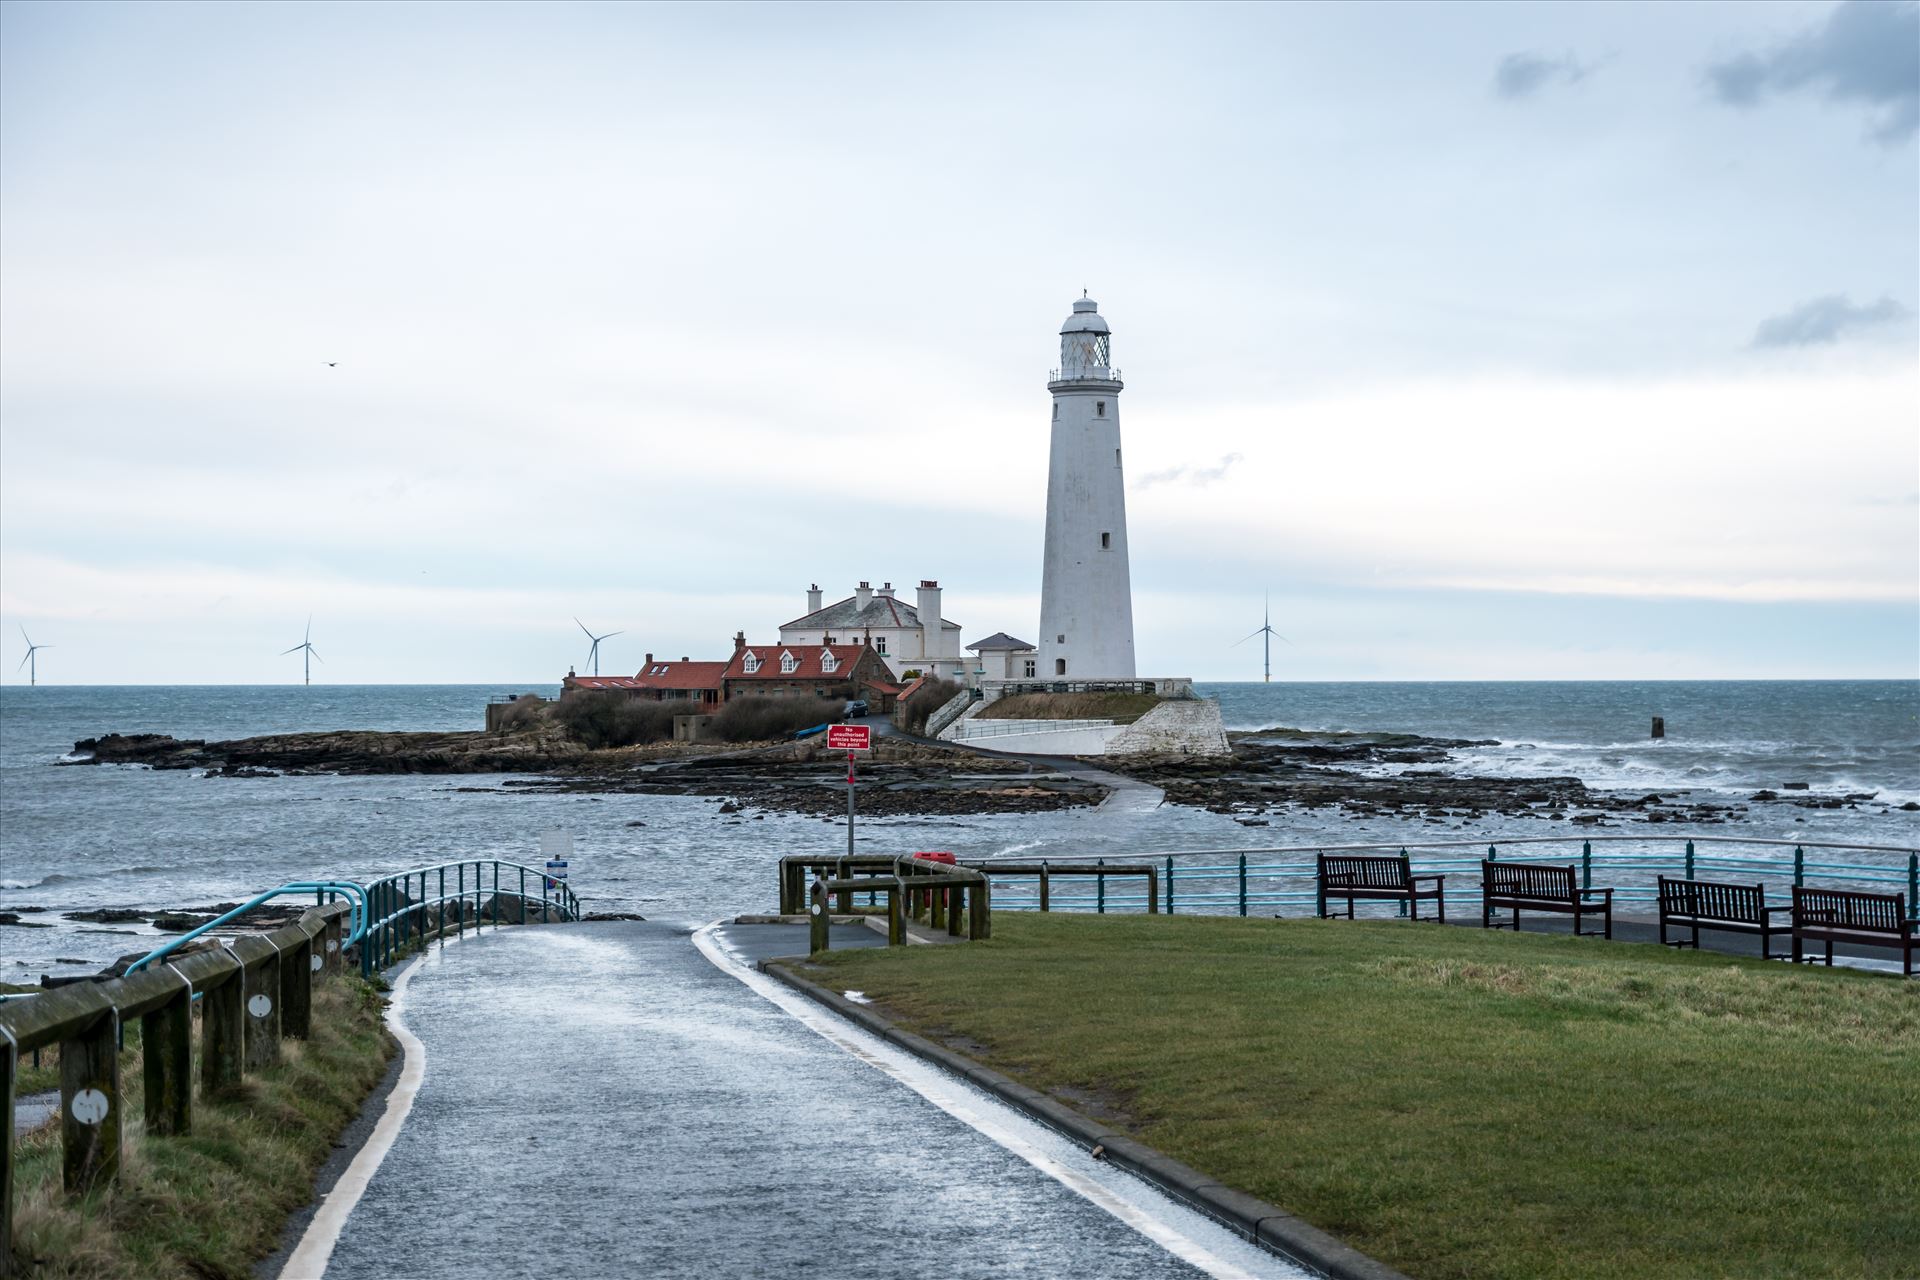 St Mary's Island, Whitley Bay. St. Mary's Island was originally called Bates Island, Hartley Bates or Bates Hill as it was originally owned by the Bates family.

The lighthouse continued to function until 1984, when it was taken out of service. The lighthouse is now open to visitors. by Graham Dobson Photography